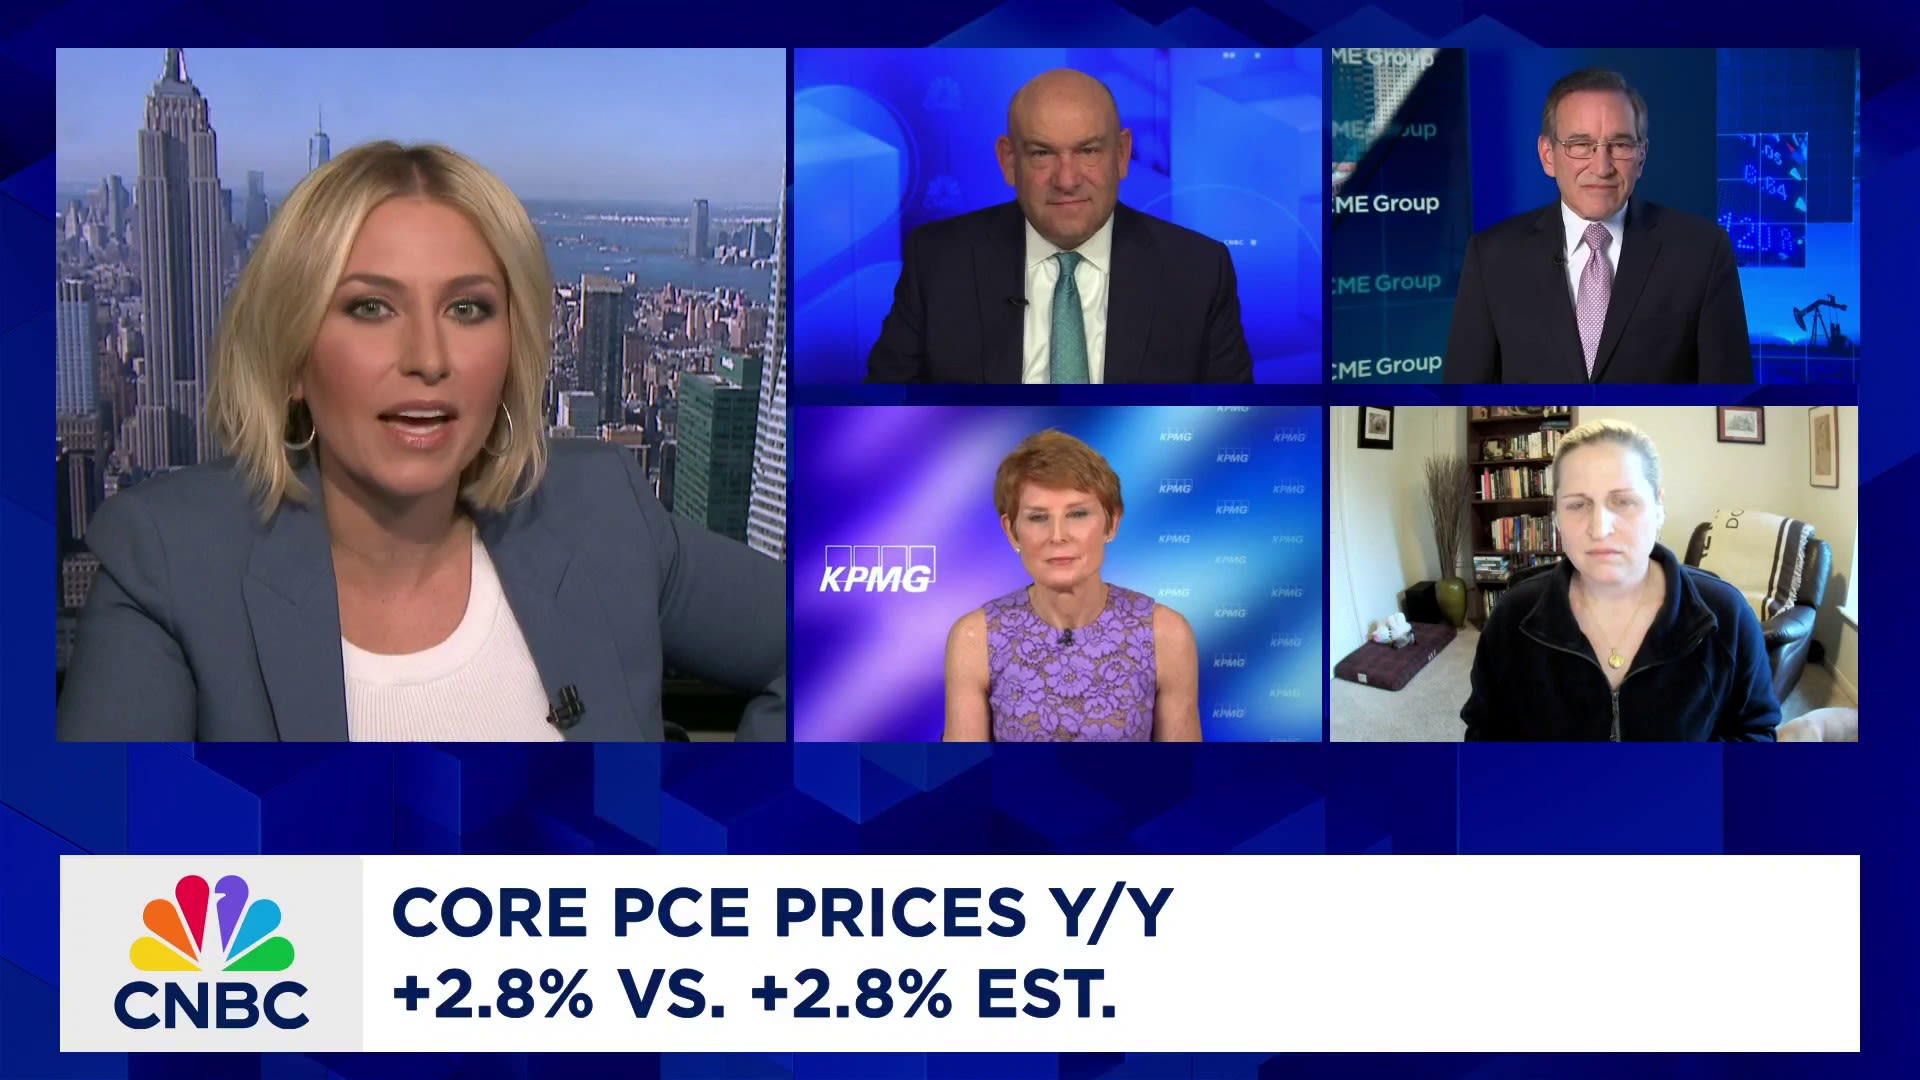 Fed remains 'between a rock and a hard place' after key PCE data, says G Squared's Victoria Greene